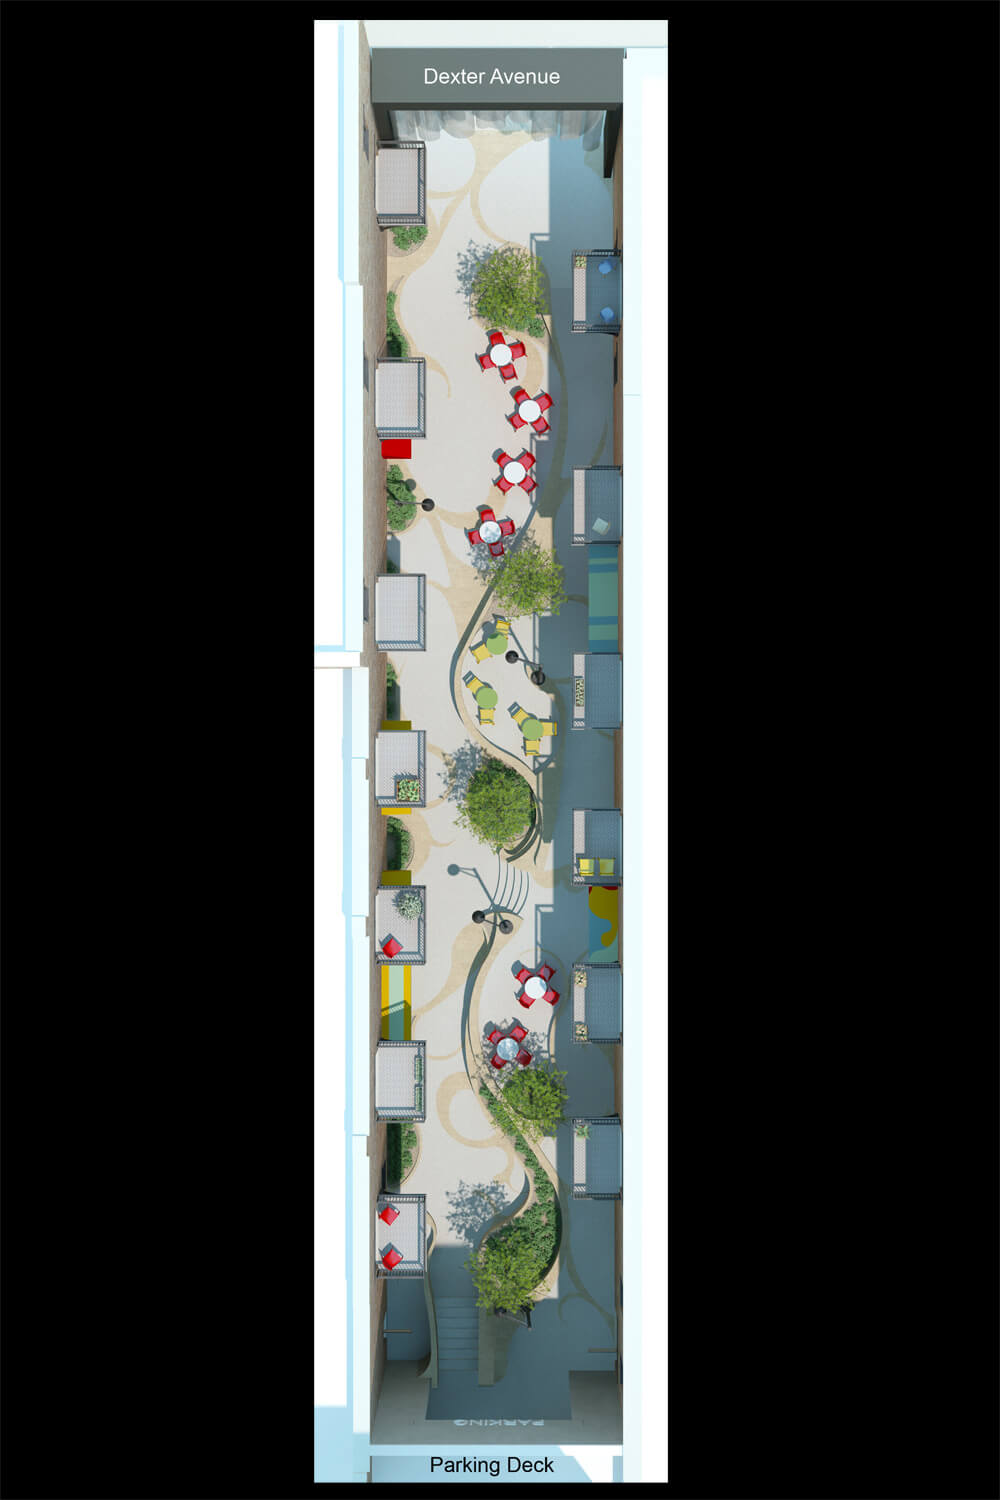 Dexter Alley Park Designed by Foshee Architecture - Overall Floor Plan View